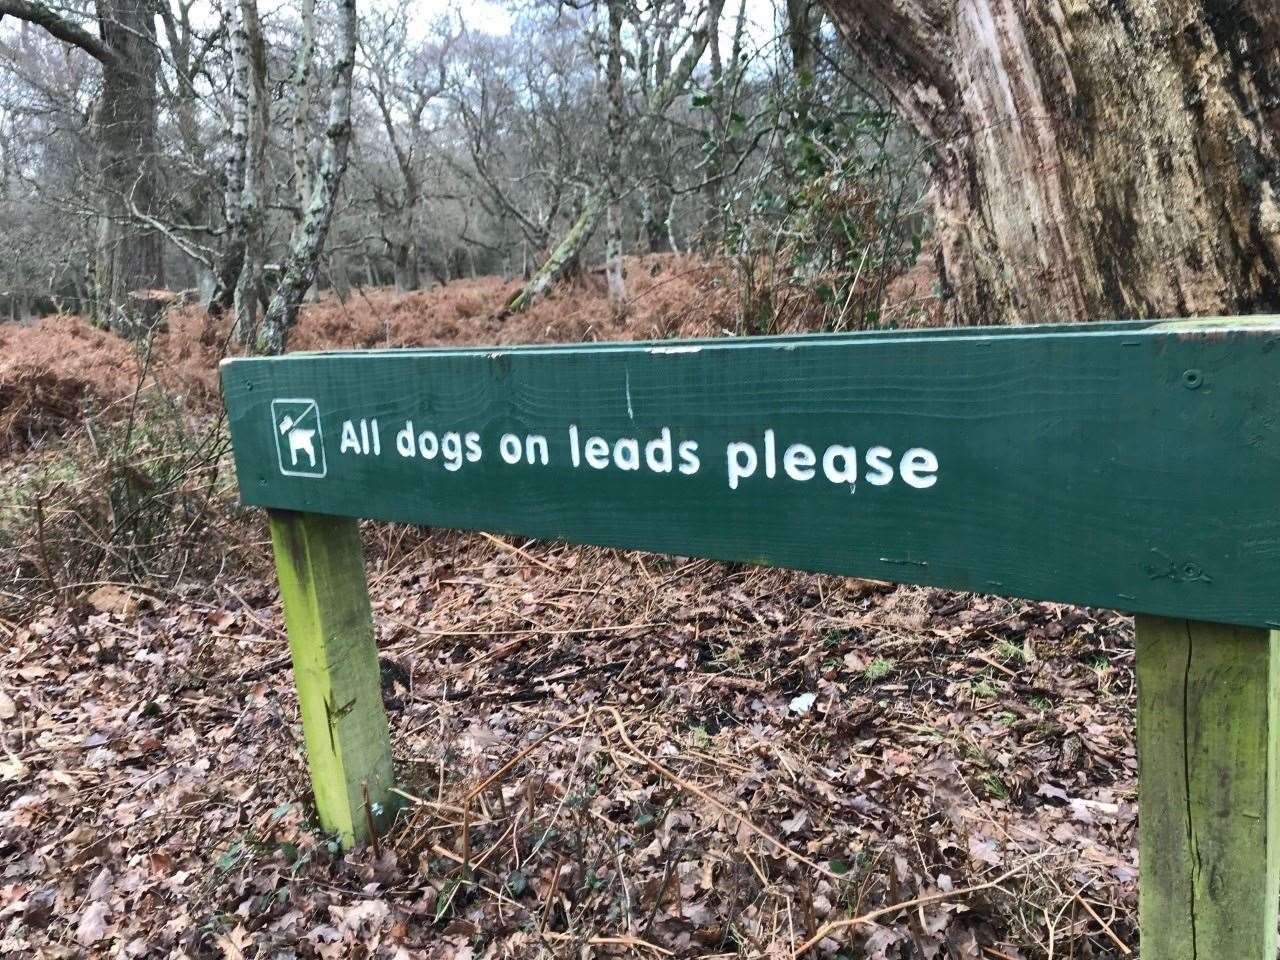 There are areas of the countryside where owners will be asked to keep dogs on leads